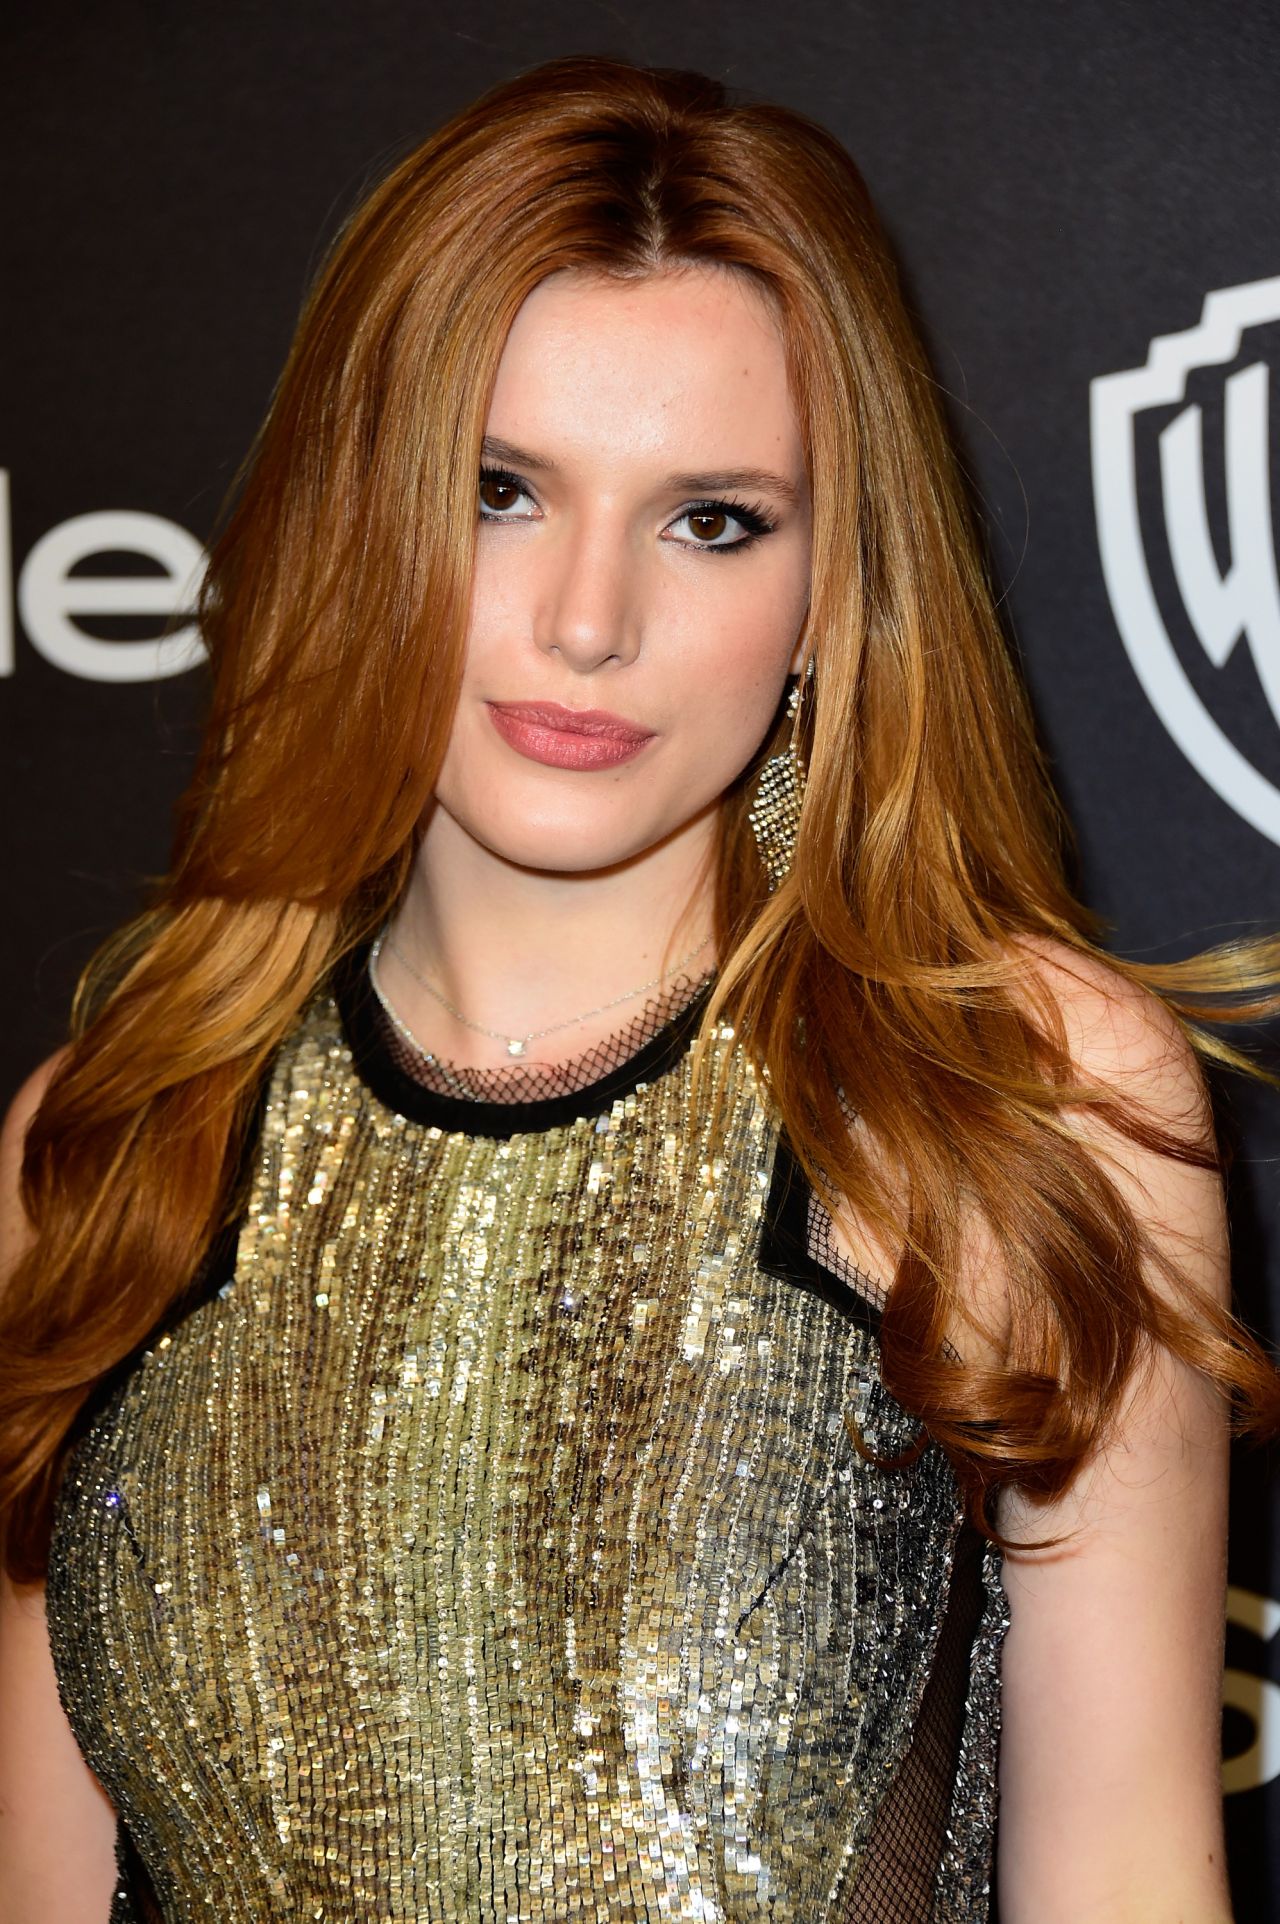 Behind The Scenes With Bella Thorne: Insights Into The Life Of A Young ...